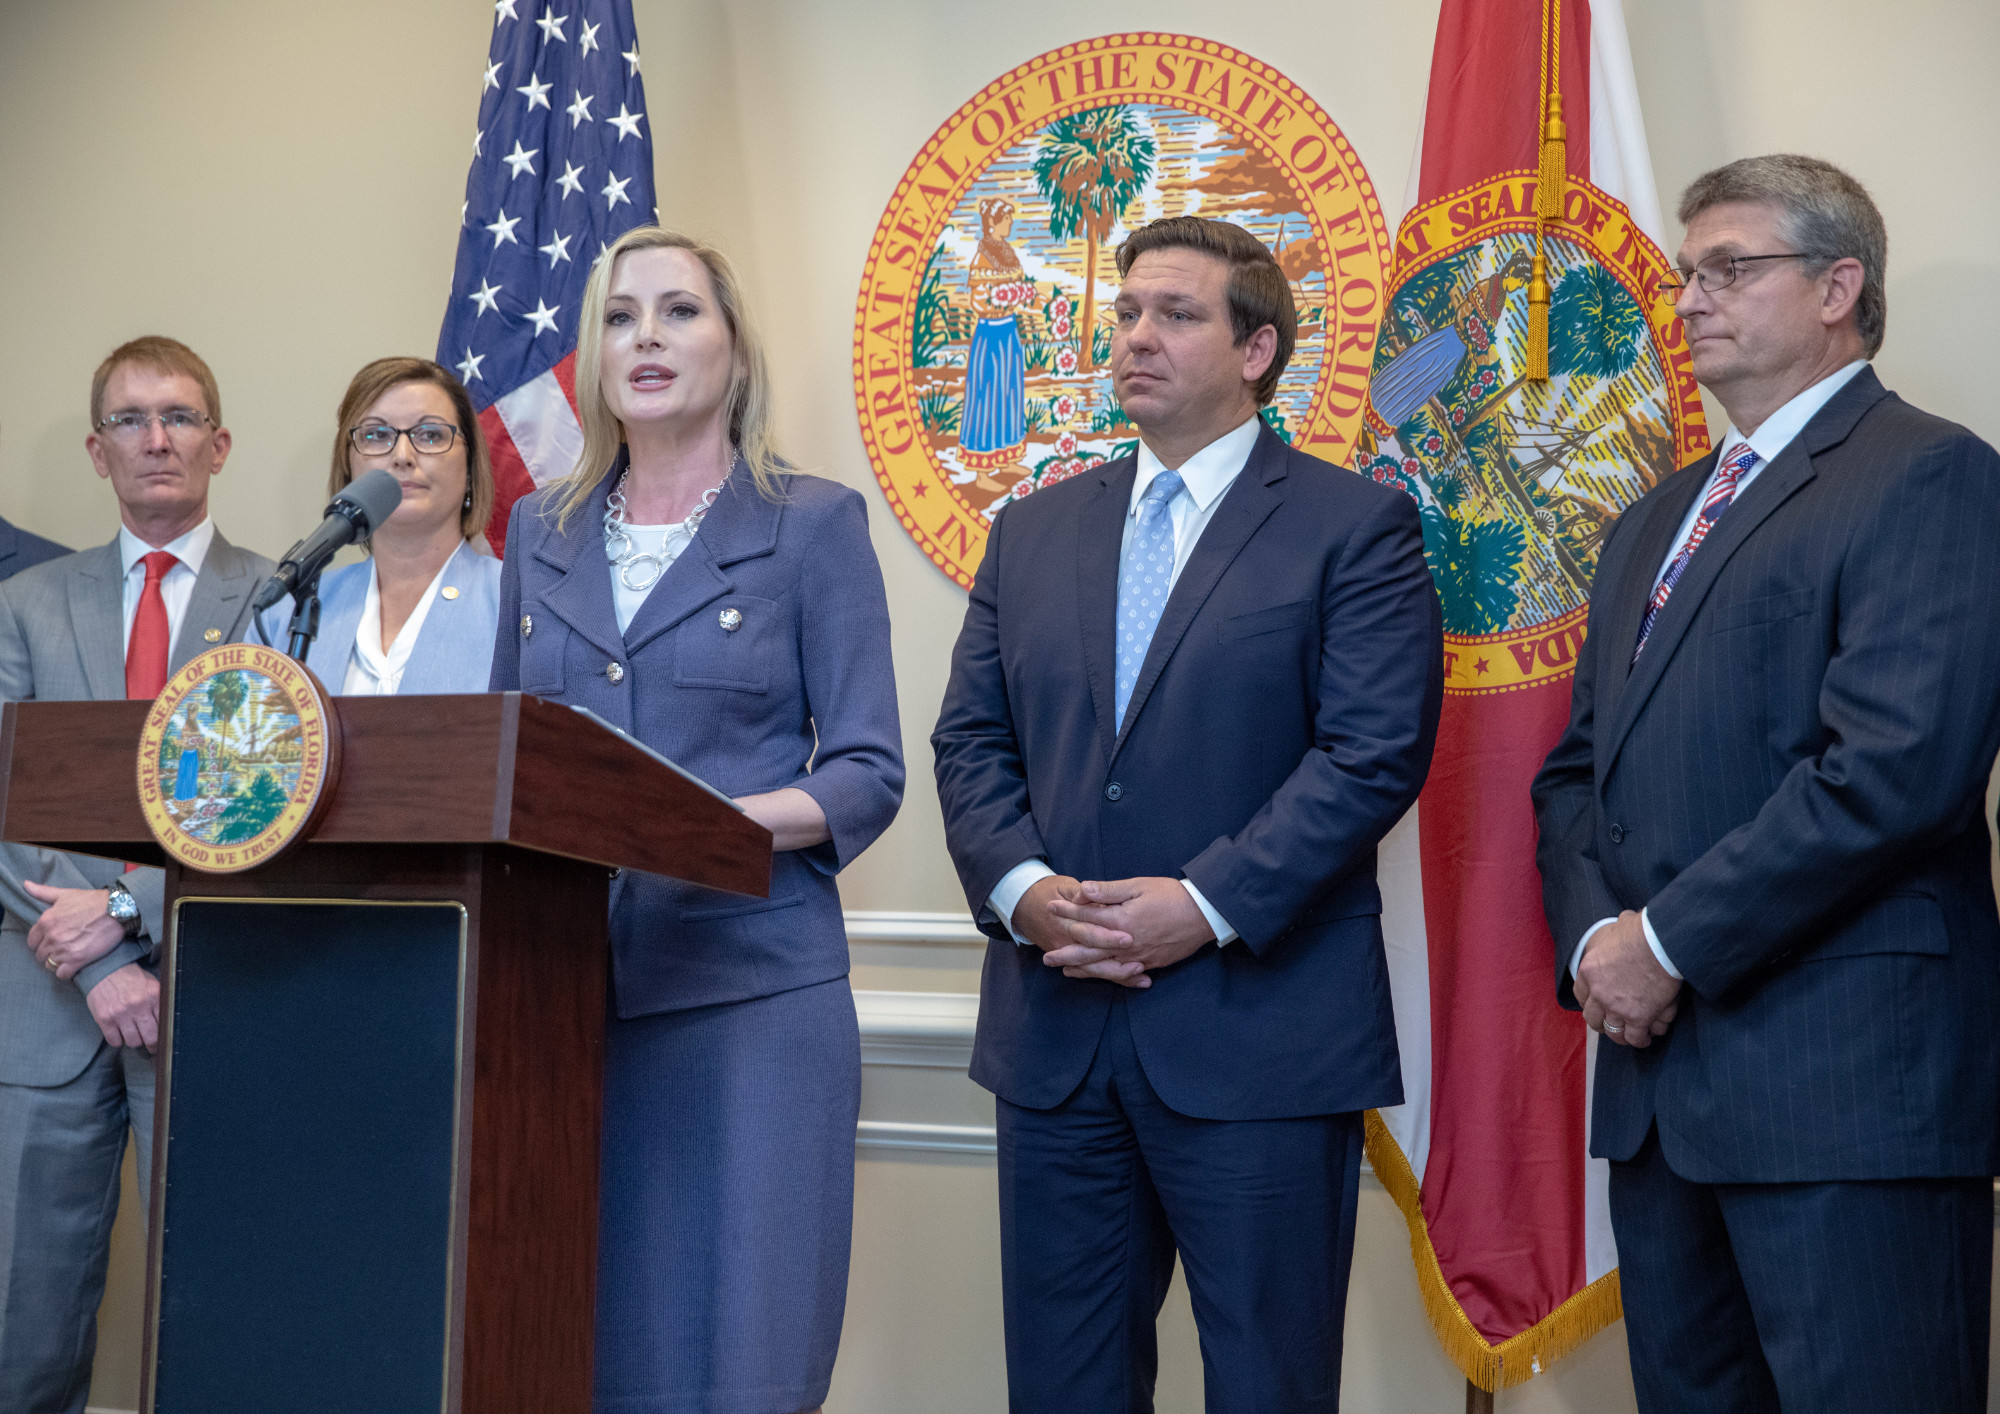 Laurel Lee at press conference with Governor DeSantis in background with others